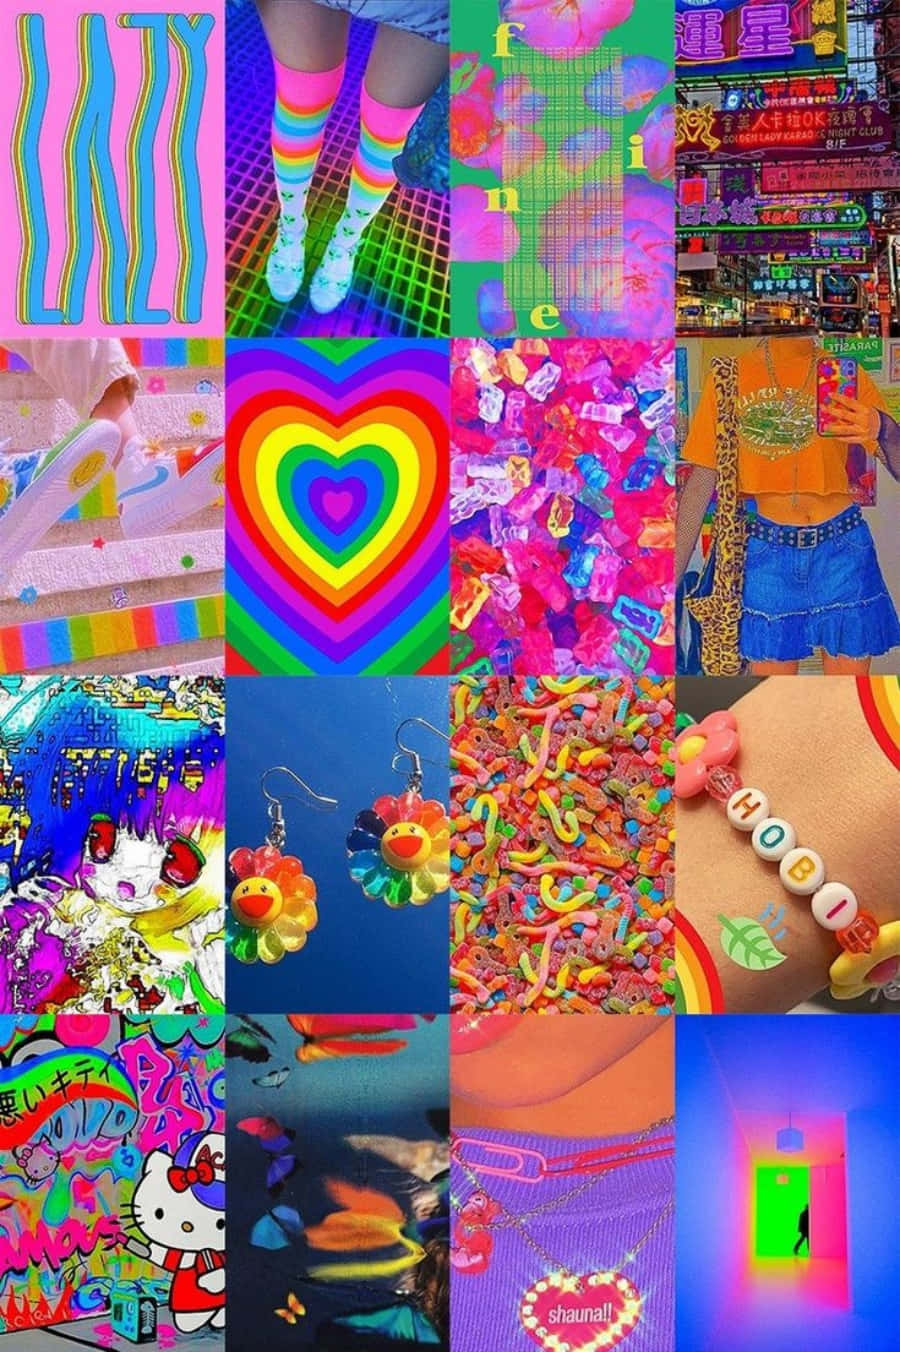 A Collage Of Colorful Pictures Of People With Different Accessories